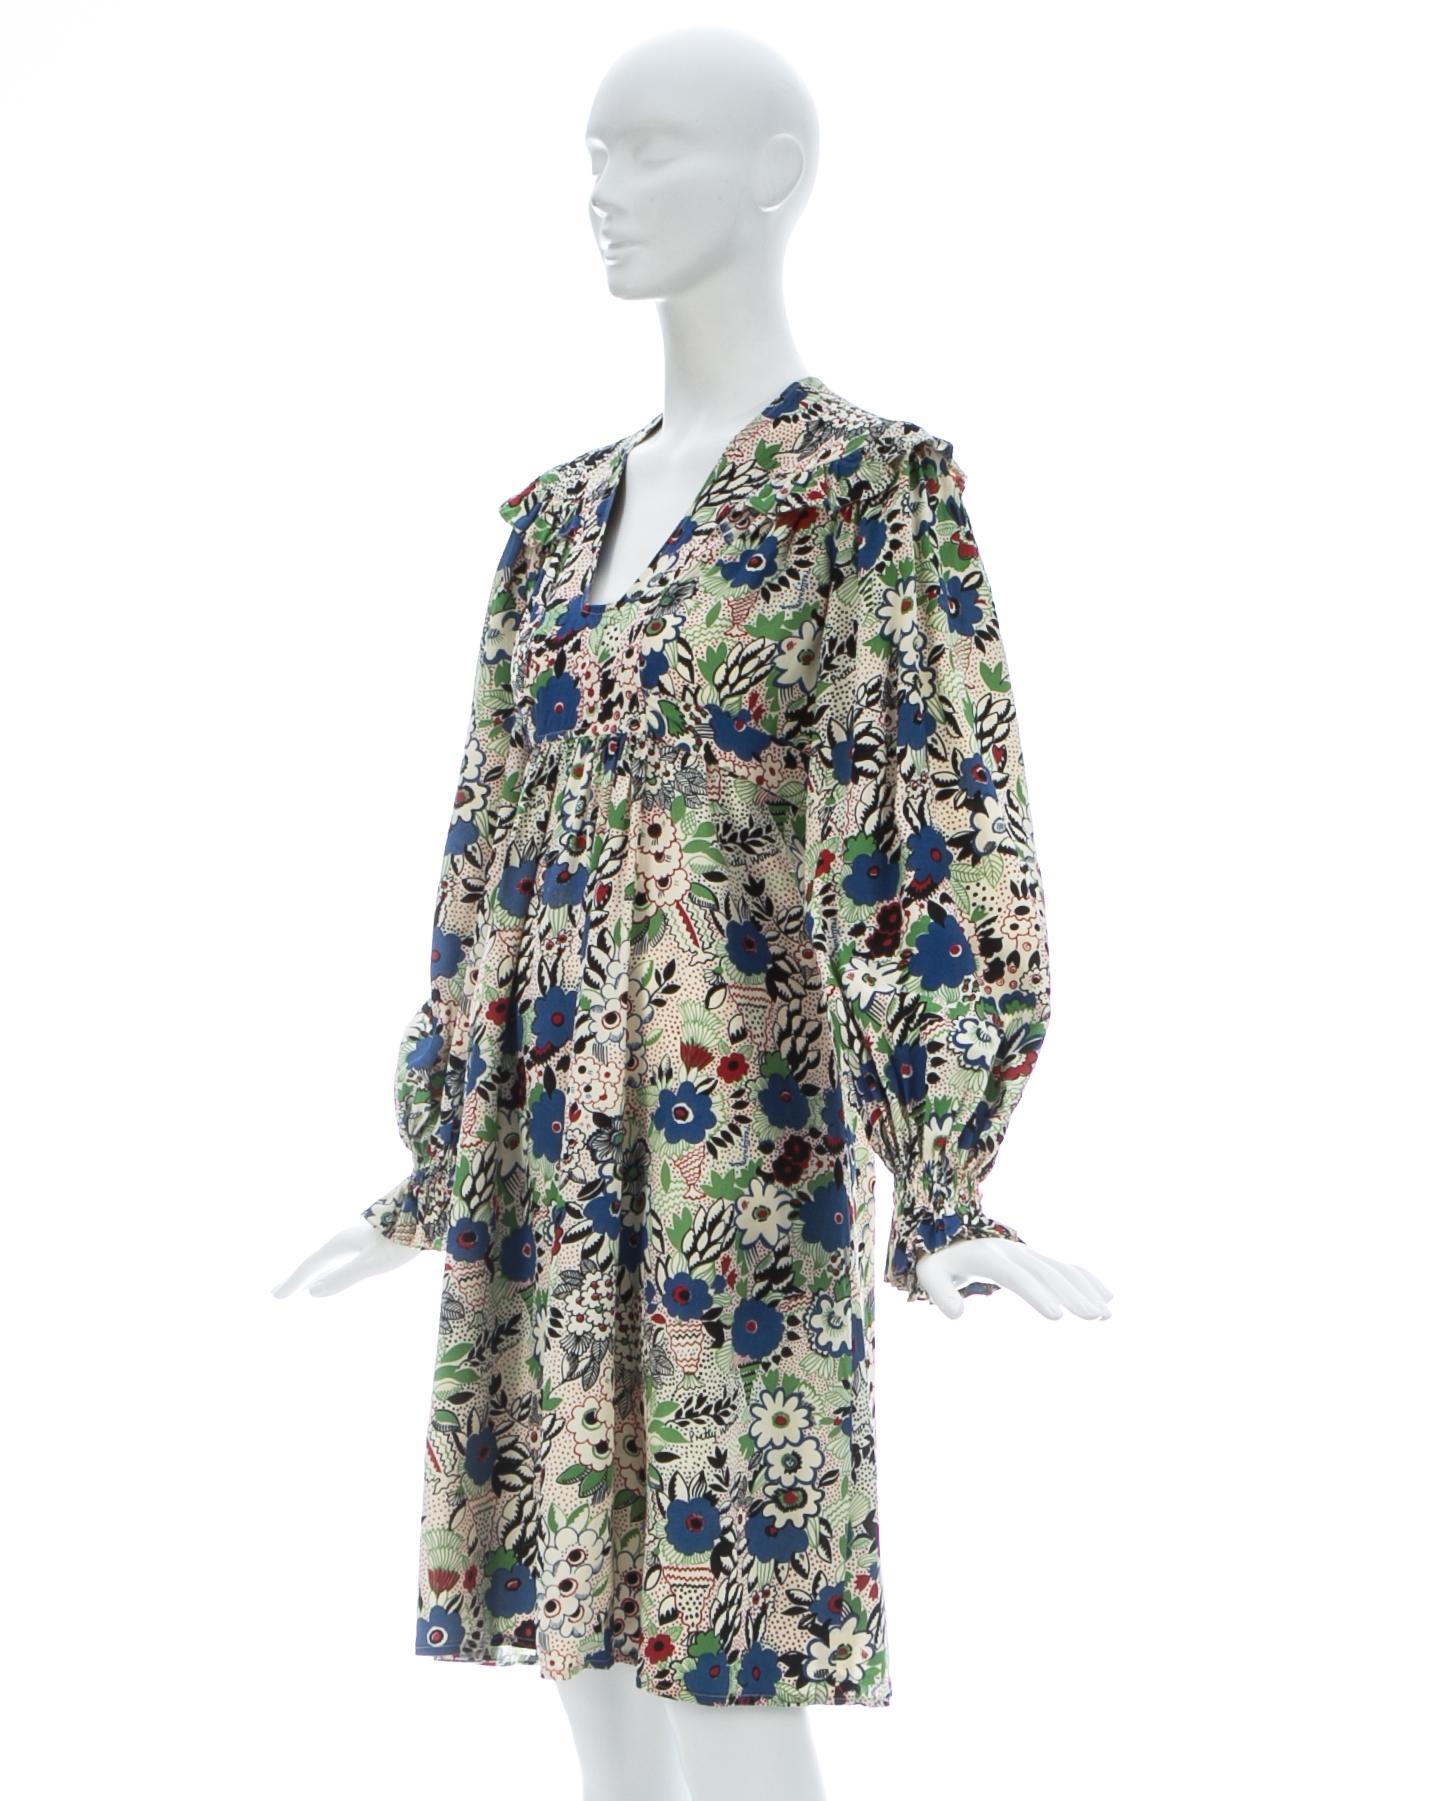 Ossie Clark marocain dress with Celia Birtwell 'pretty woman' print, ca. 1970 In Good Condition For Sale In London, London